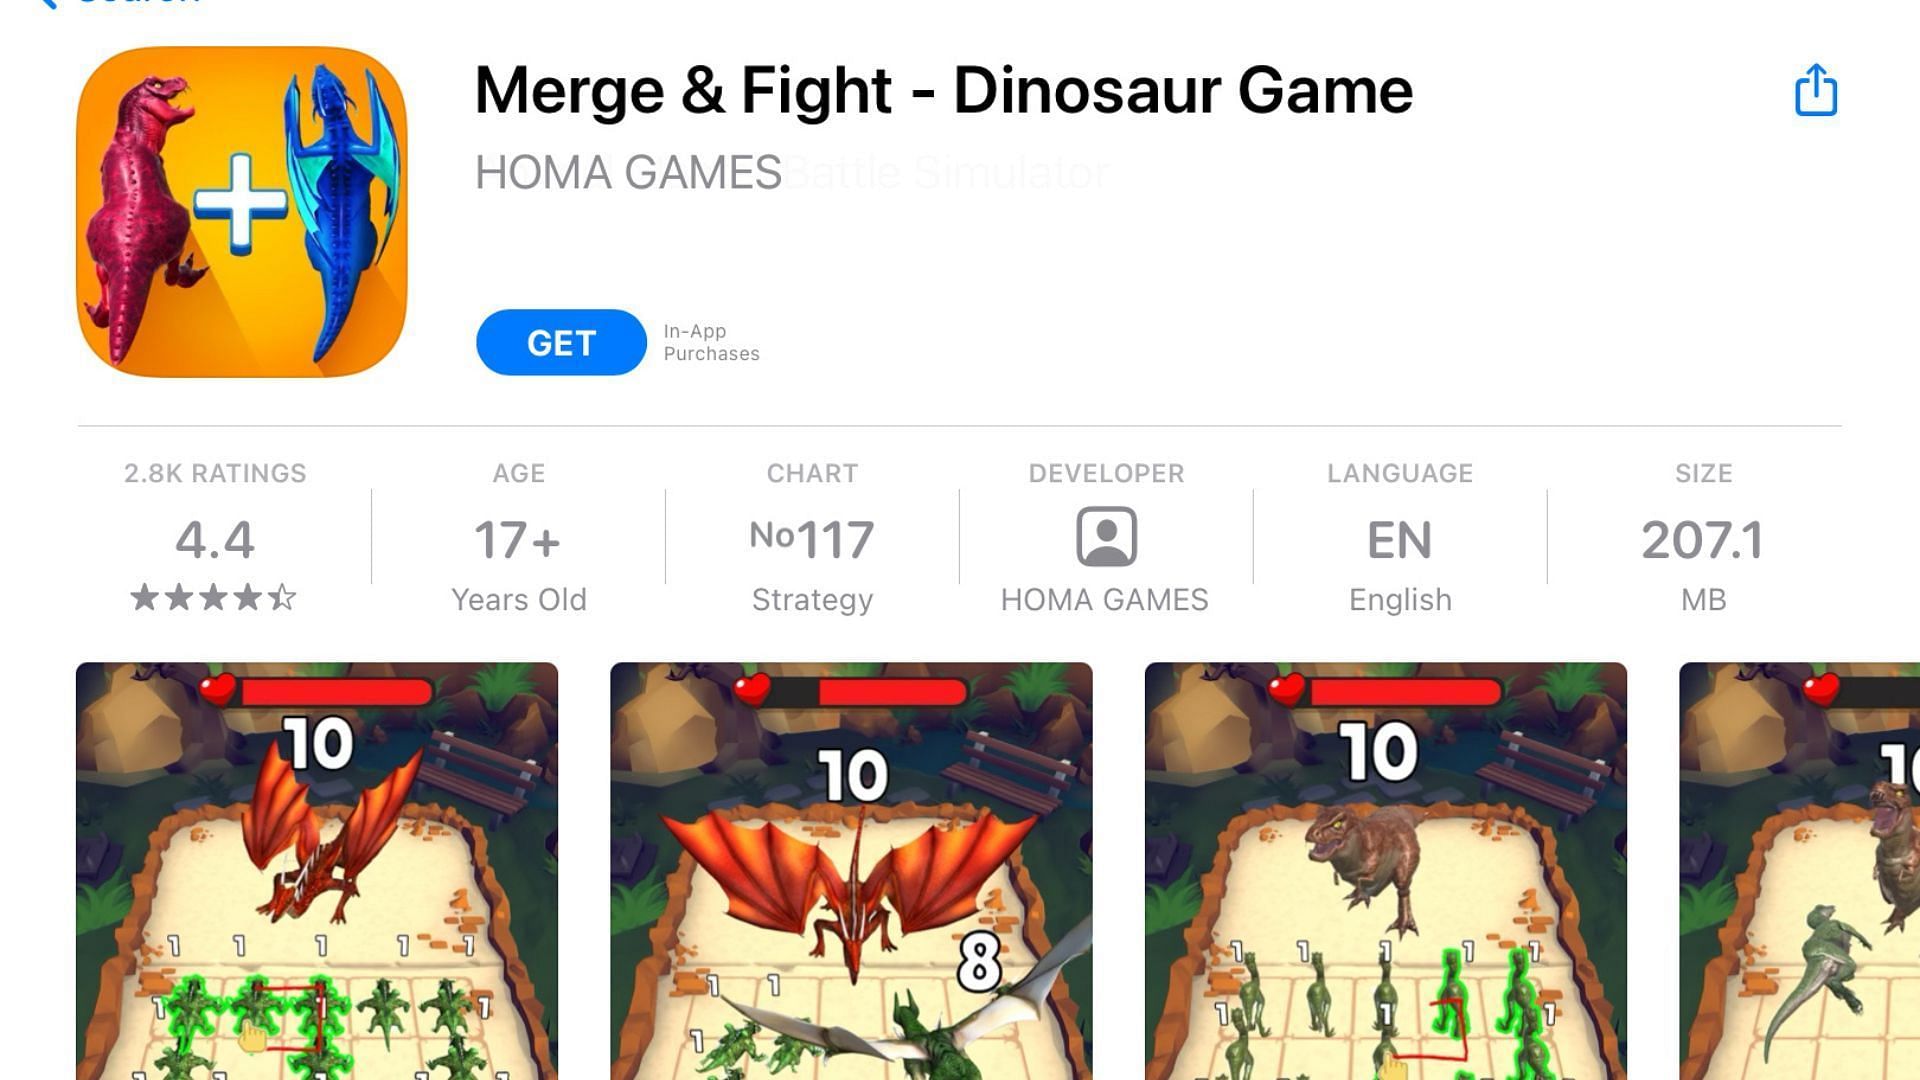 Merge &amp; Fight collected 110 million downloads in 2022 (Image via App Store)